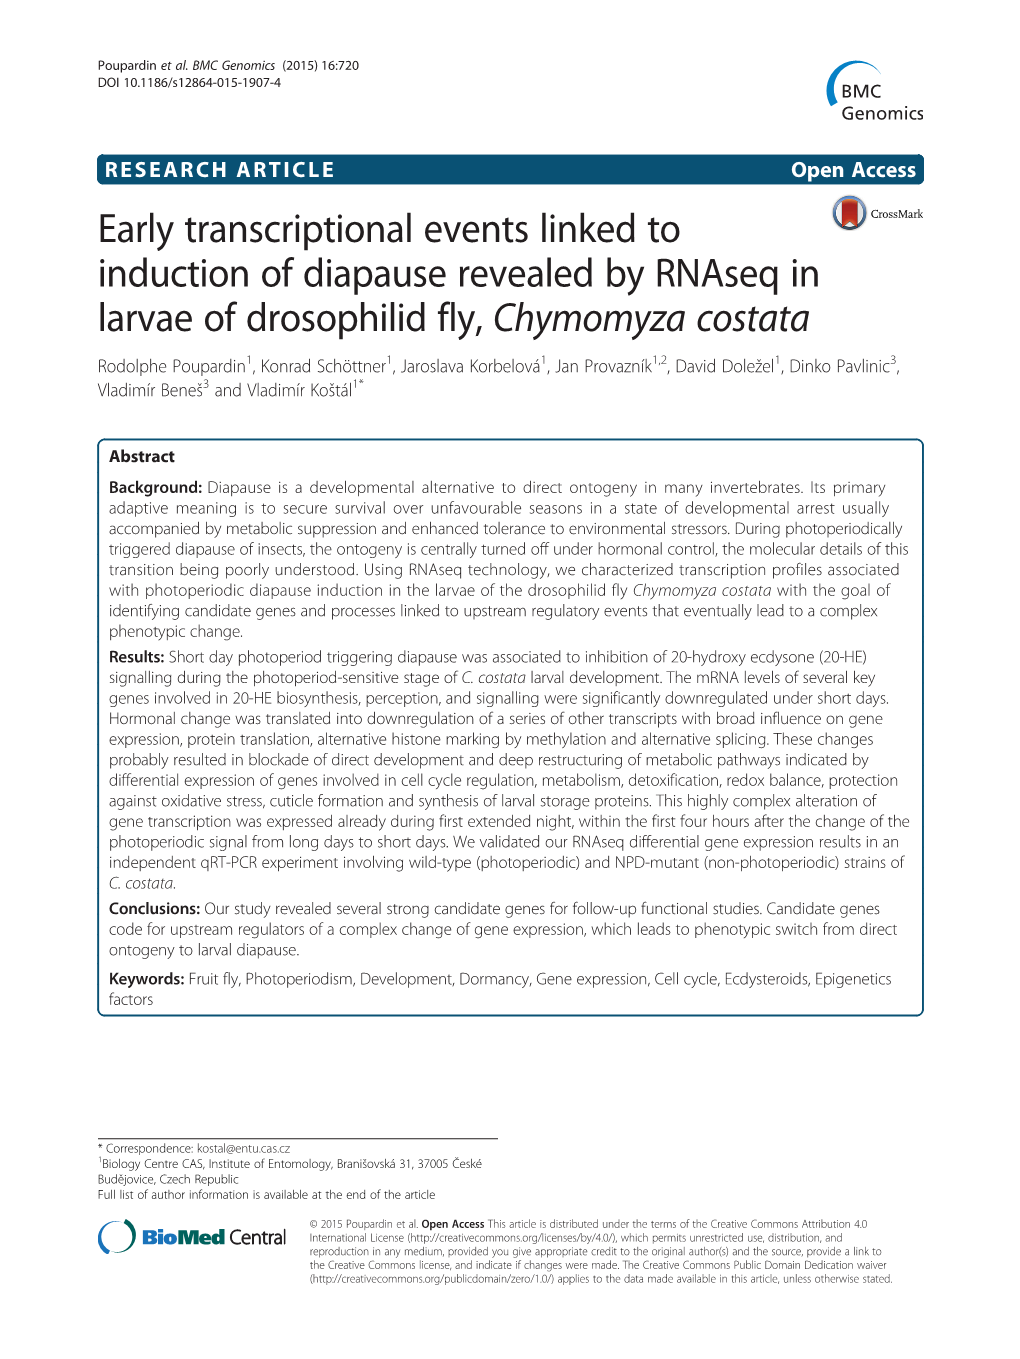 Early Transcriptional Events Linked to Induction of Diapause Revealed By